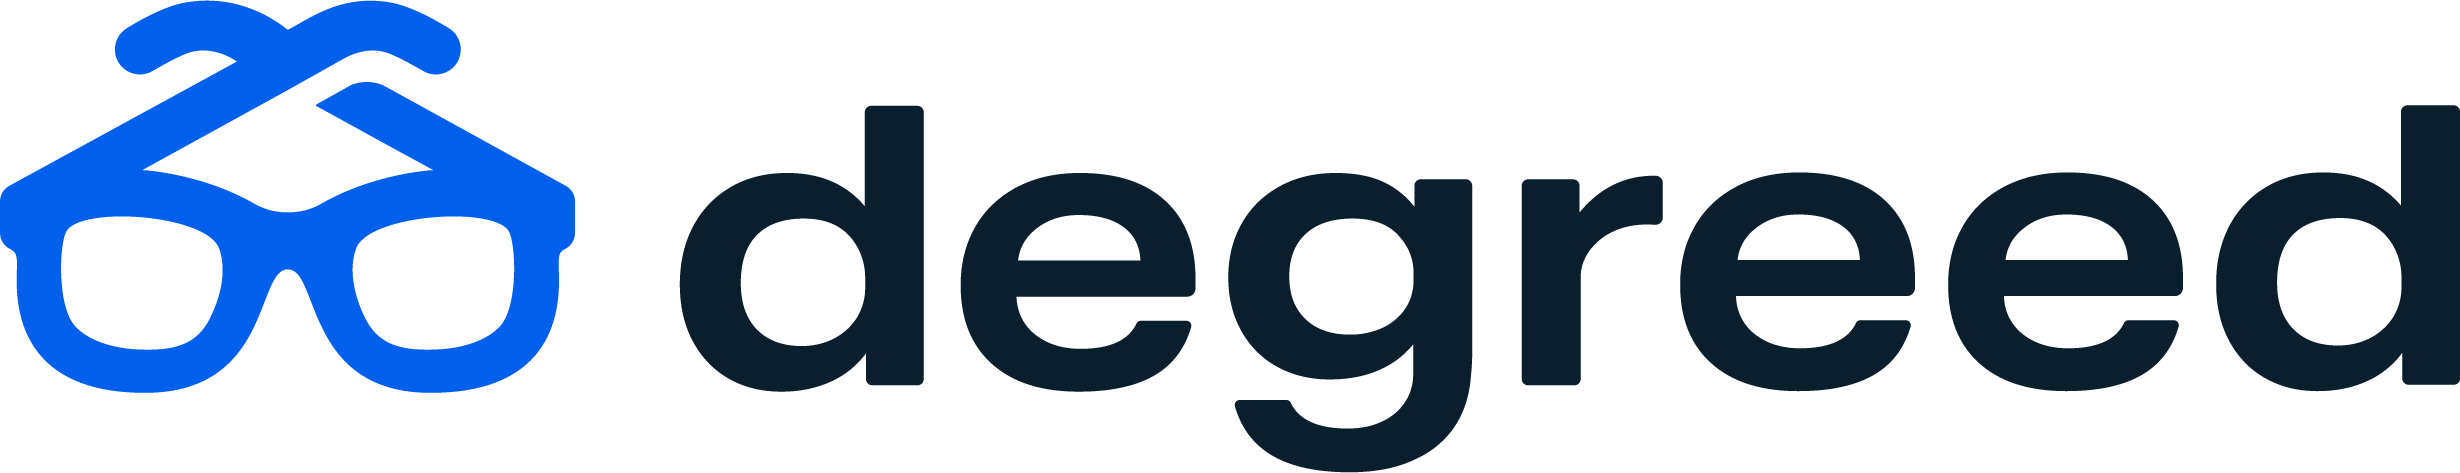 degreed-logo-official (1).png